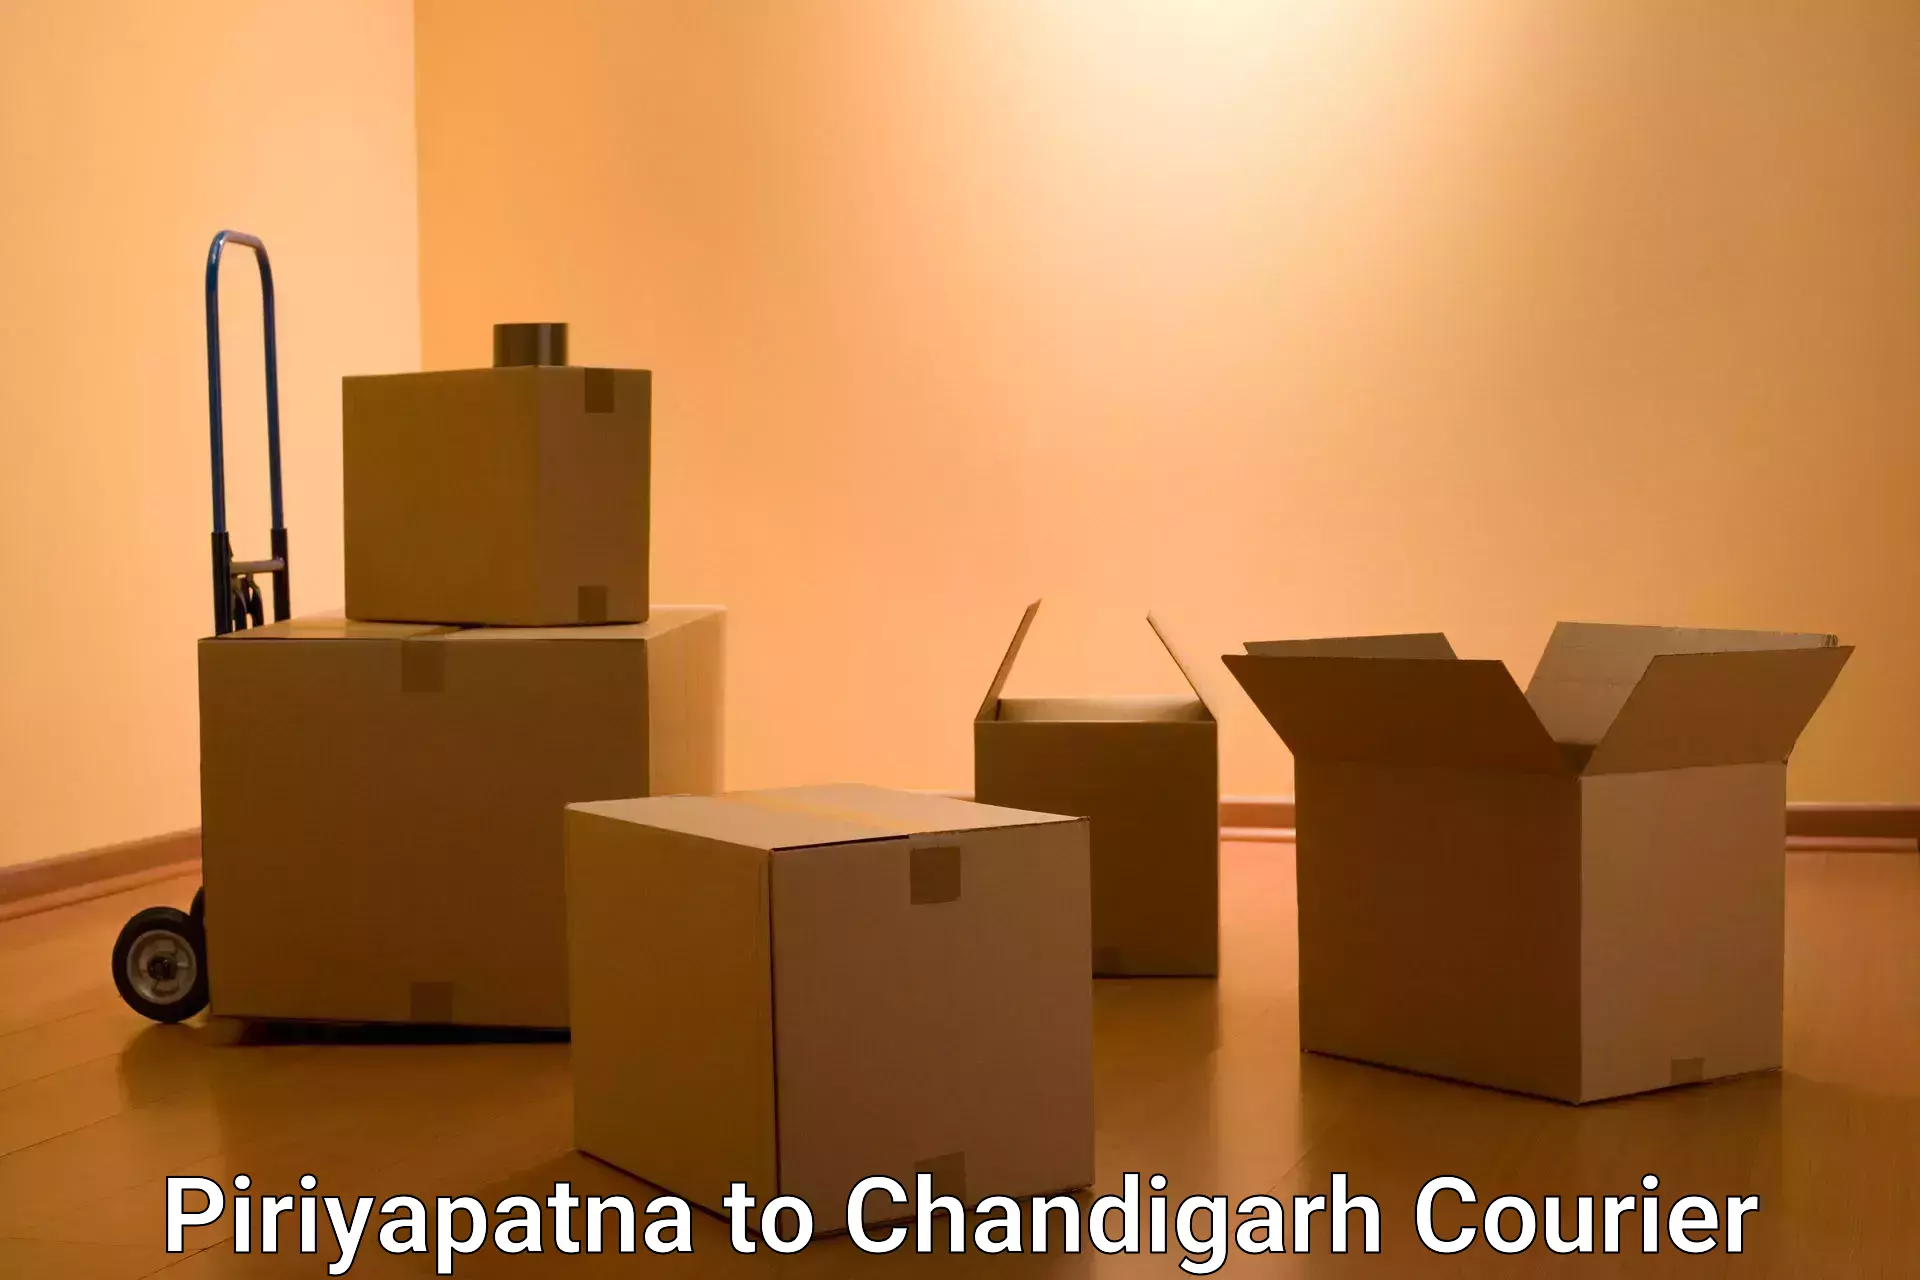 Large-scale shipping solutions Piriyapatna to Chandigarh